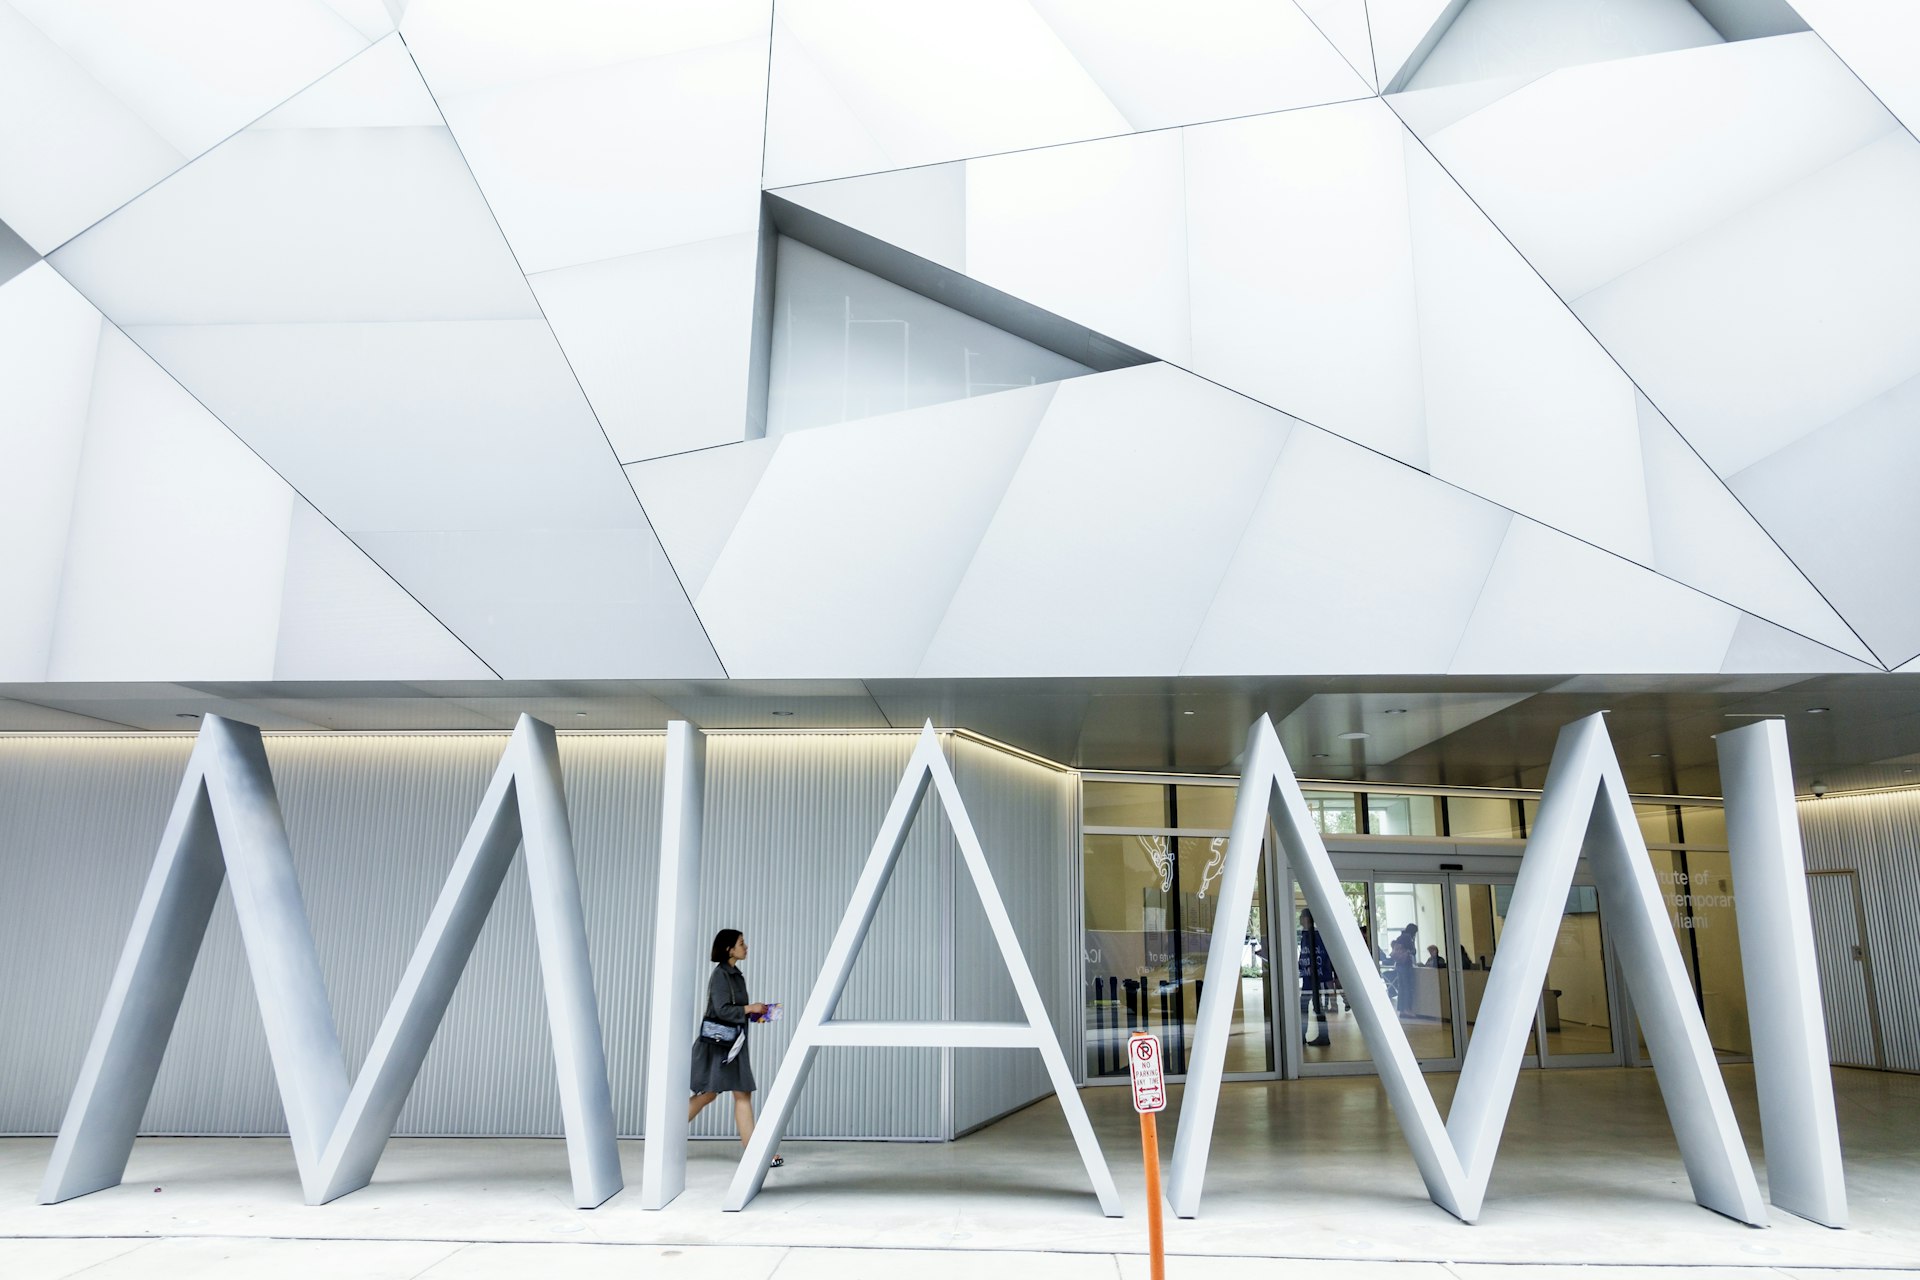 A woman walks past the white Institute of Contemporary Art in Miami entrance, which spells out Miami in the architecture